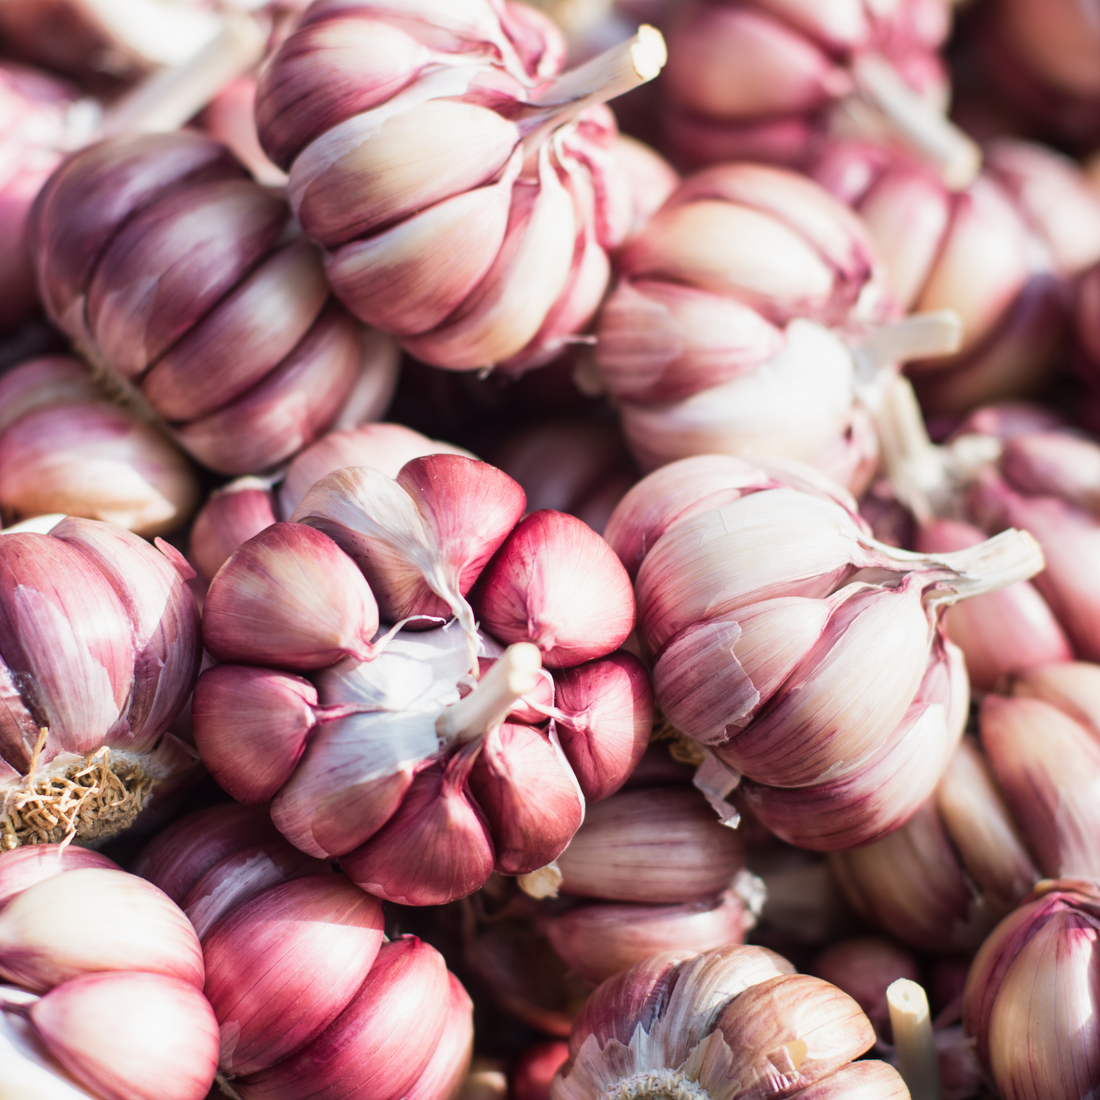 Why You Should Never Feed Your Pets Garlic